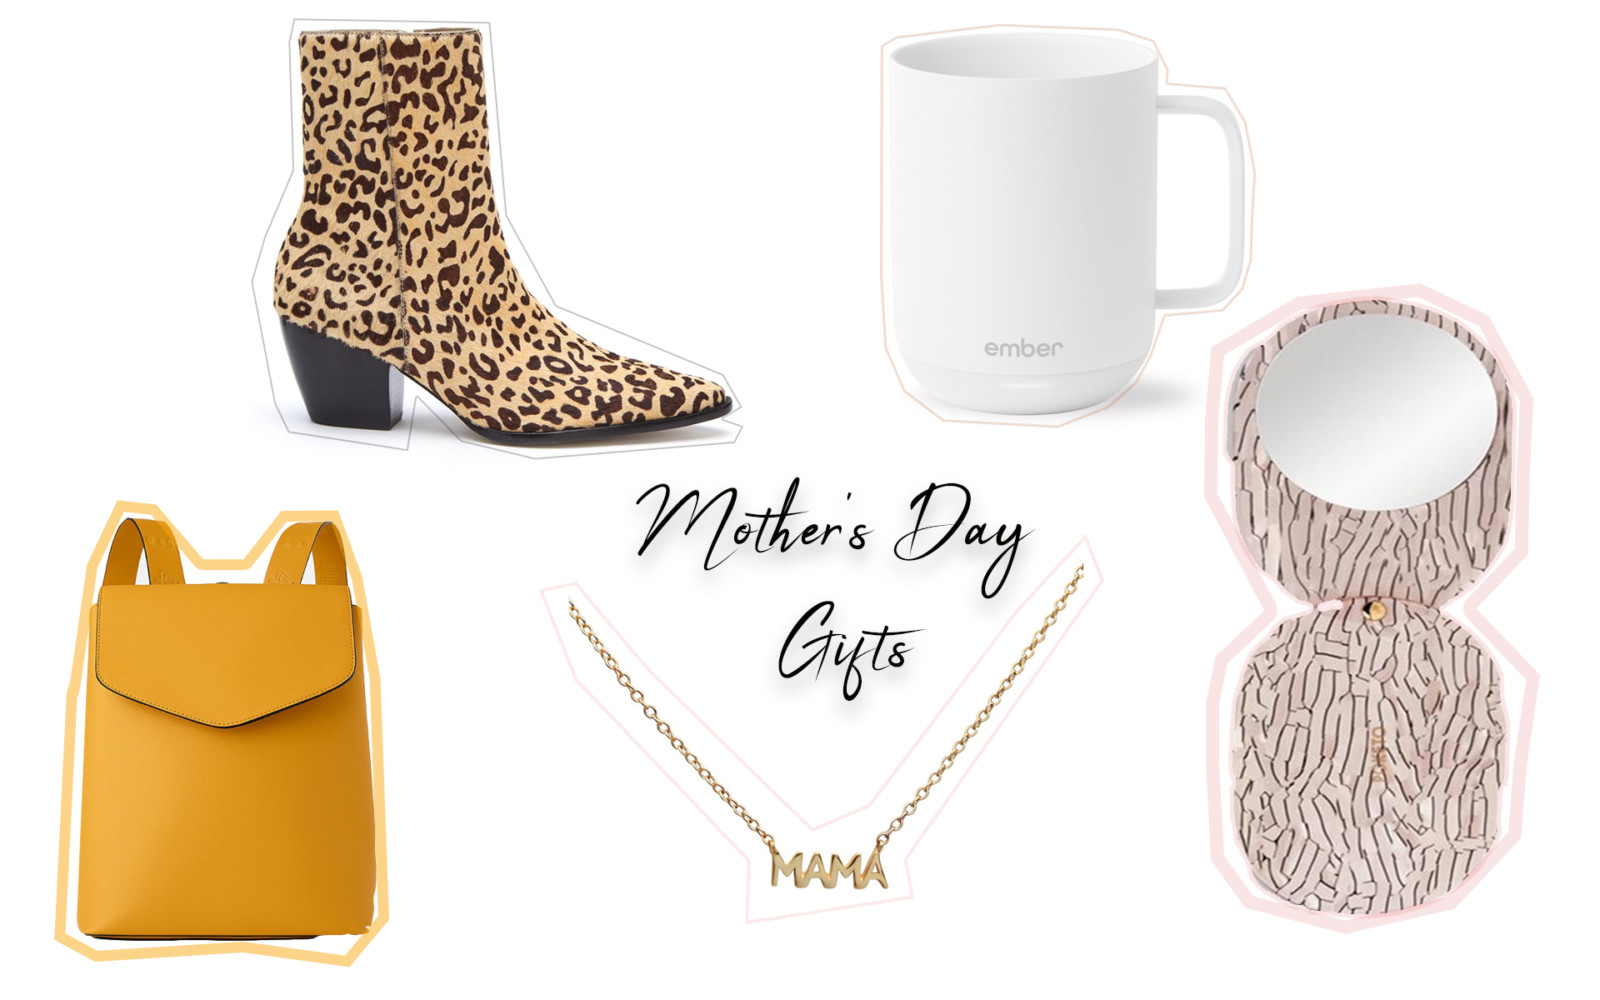 Mother’s Day Gifts!